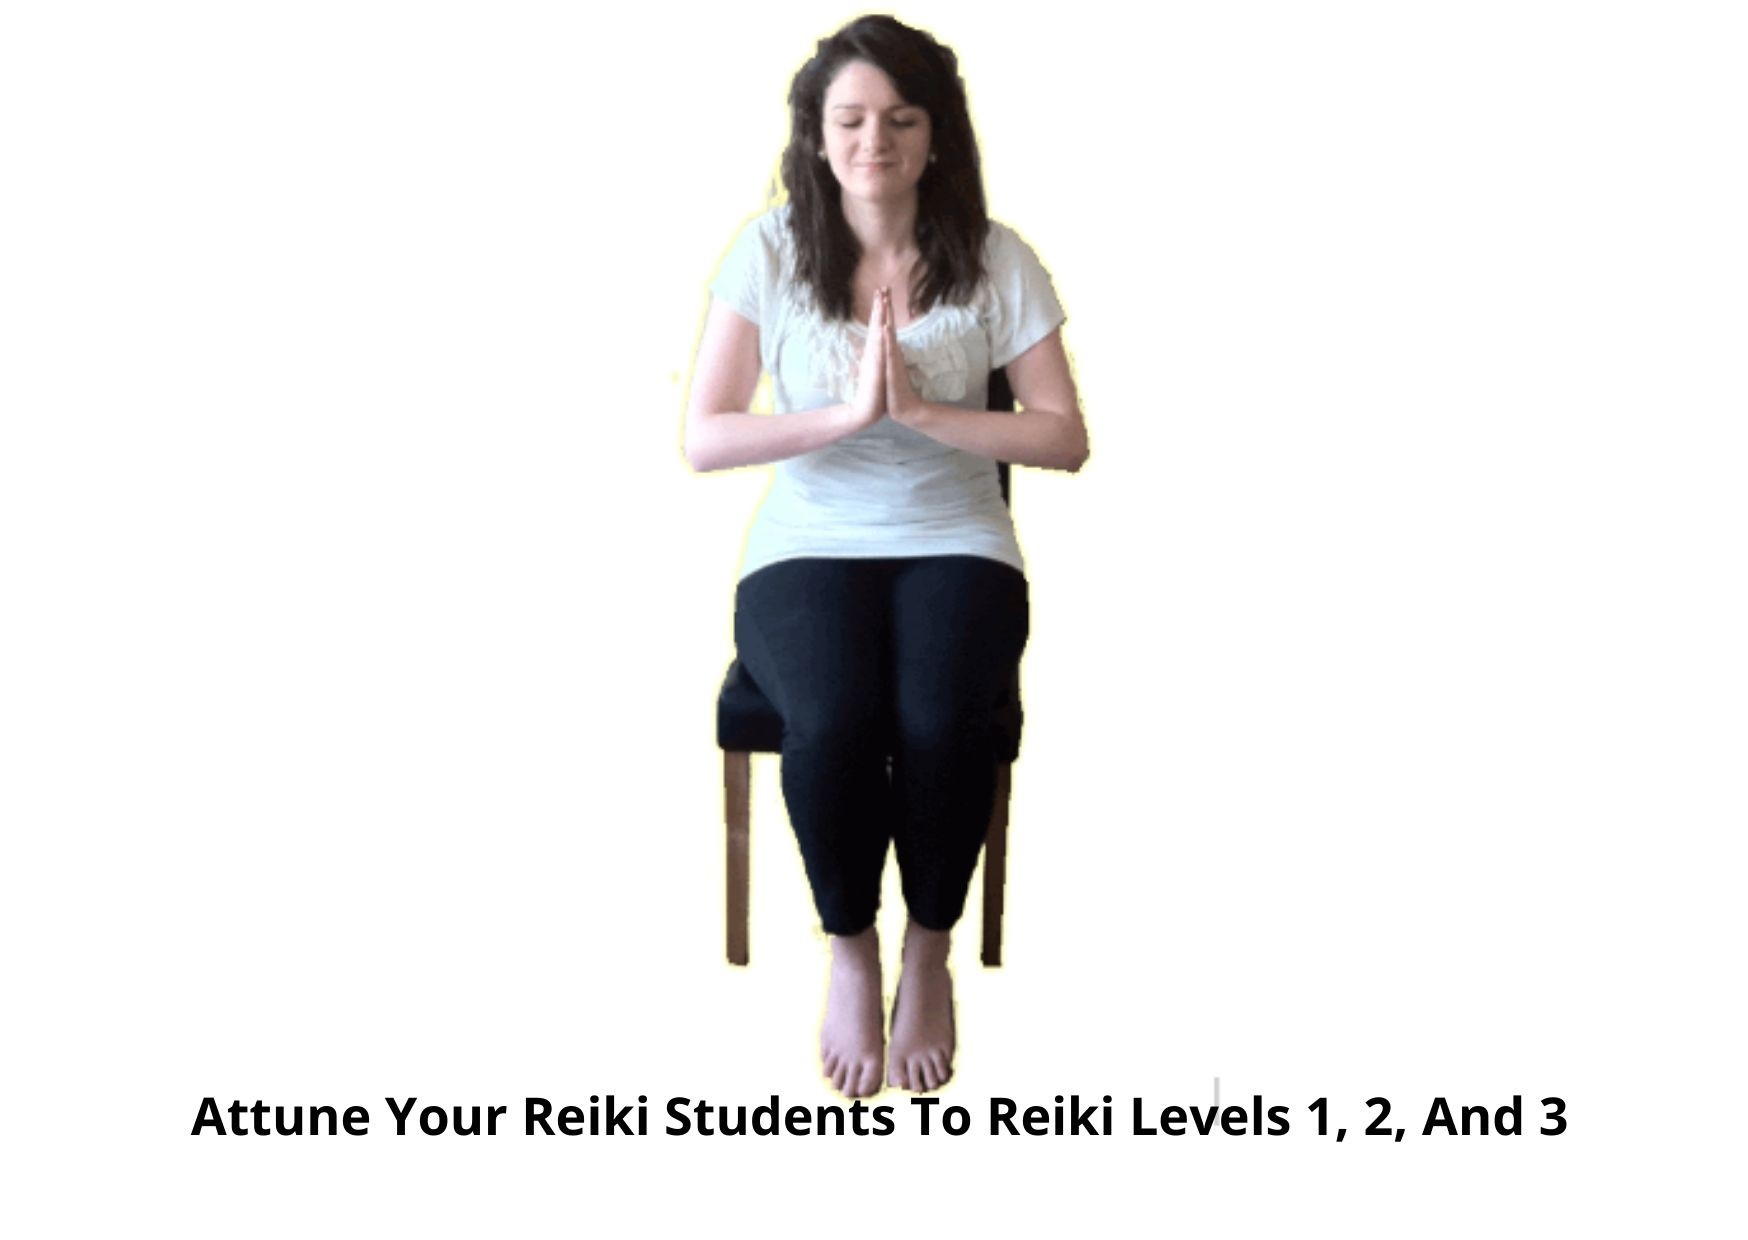 How To Attune Your Reiki Students To Reiki Levels 1, 2, And 3 In A Single Combined Attunement